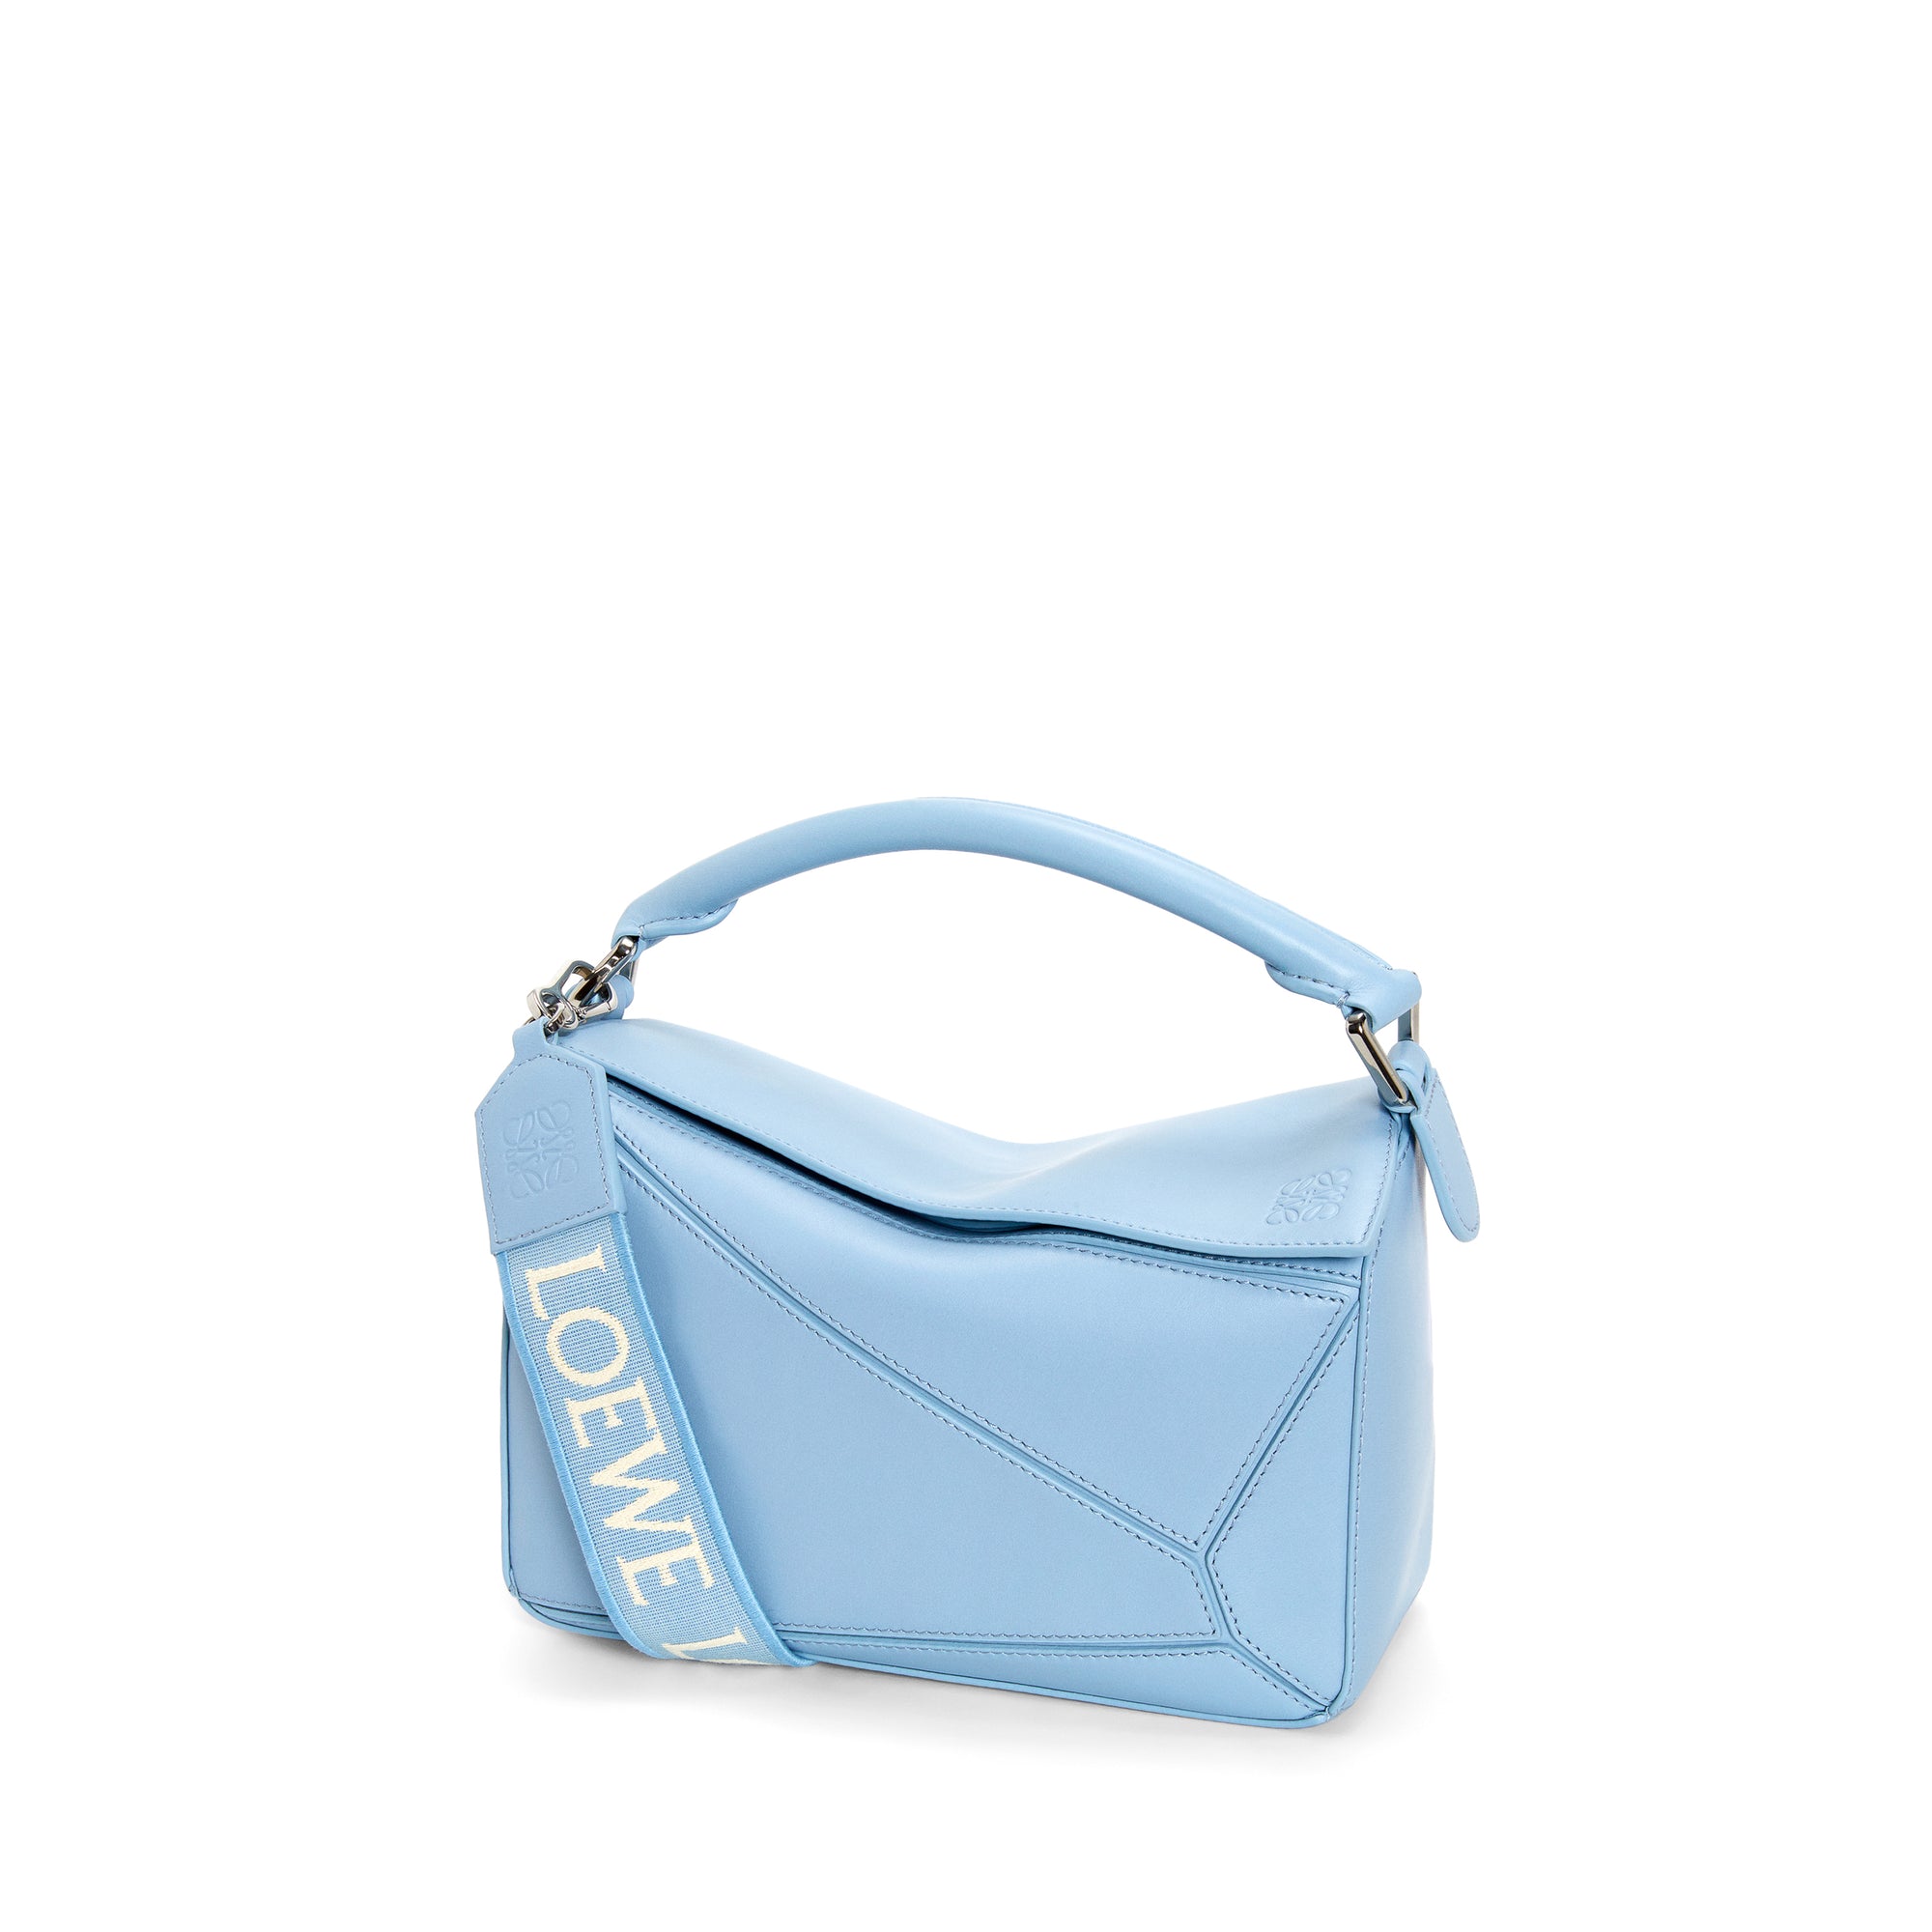 Loewe - Women’s Puzzle Small Bag - (Dusty Blue) view 2